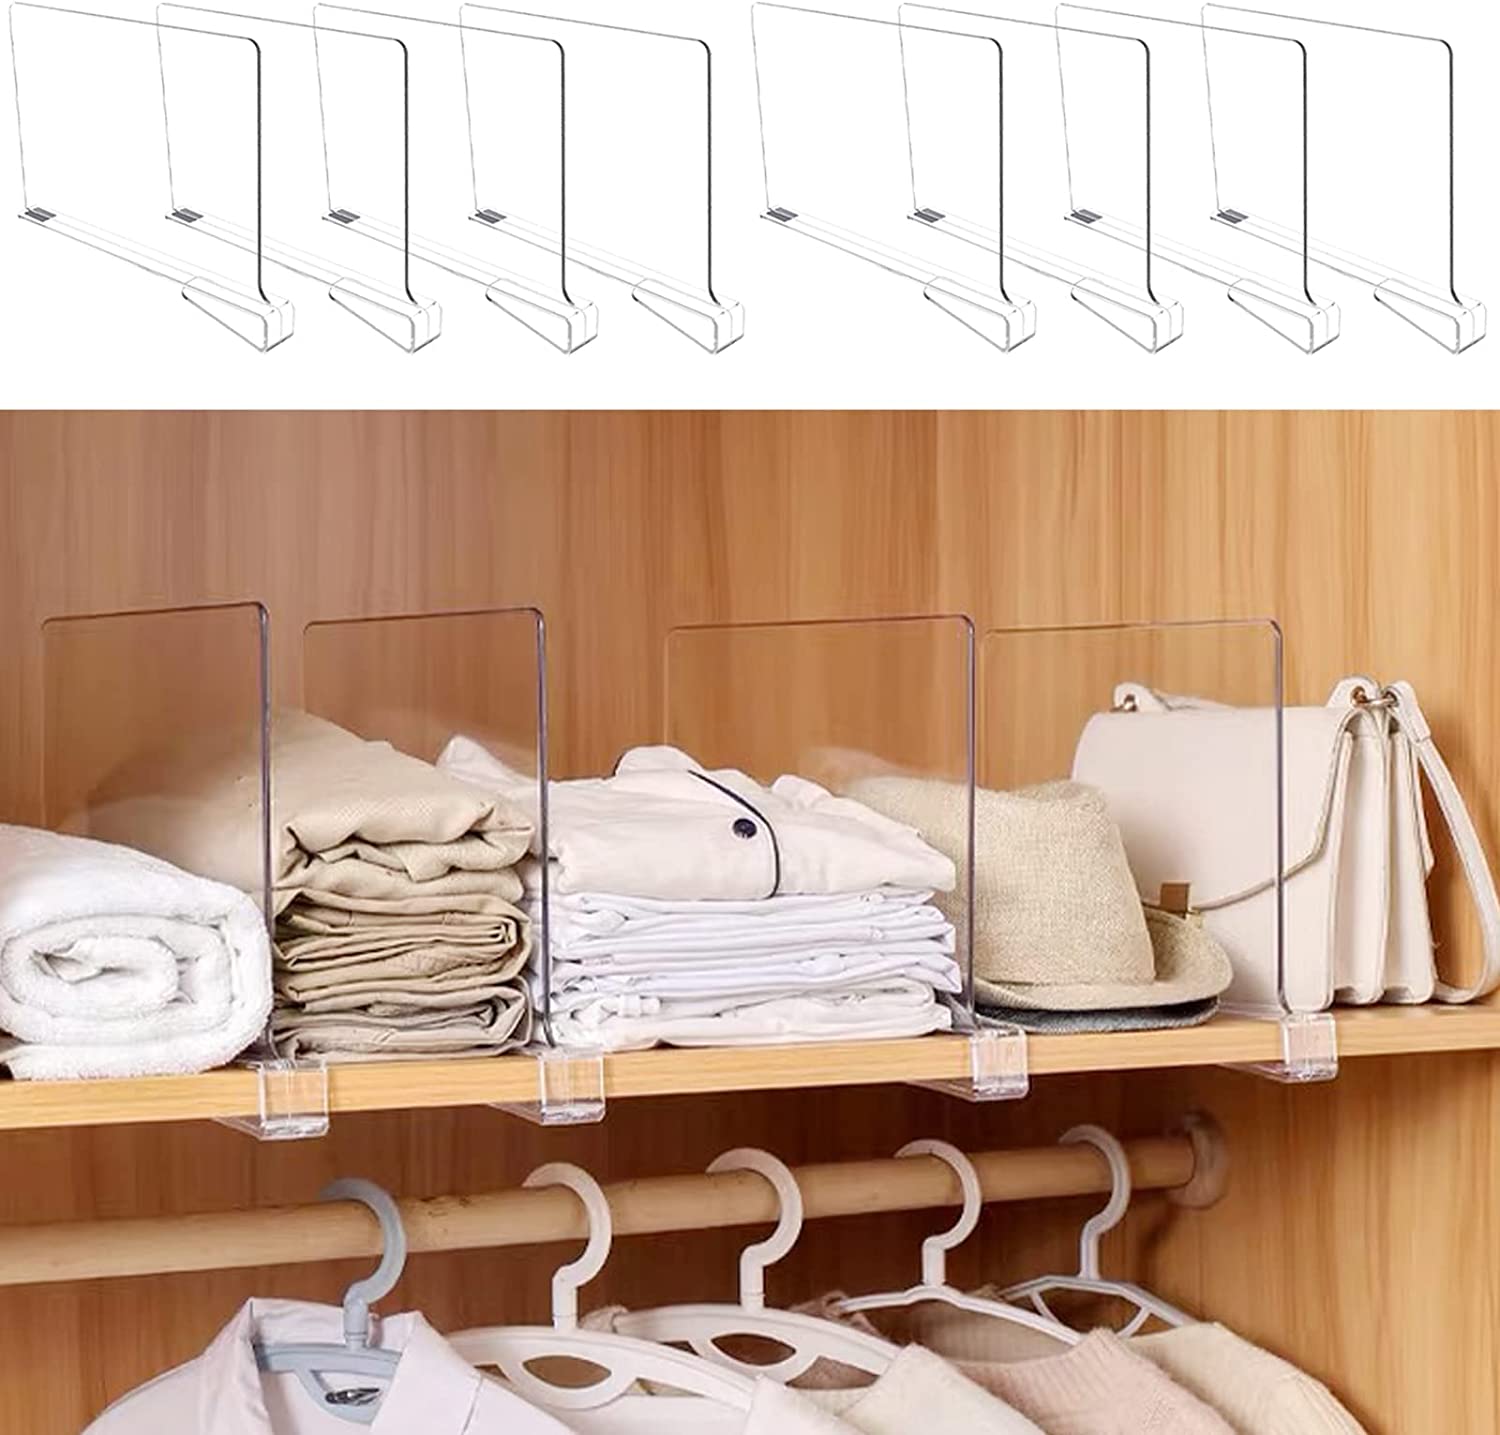 How to Organize and Store Your Underwear - Central Indonesia